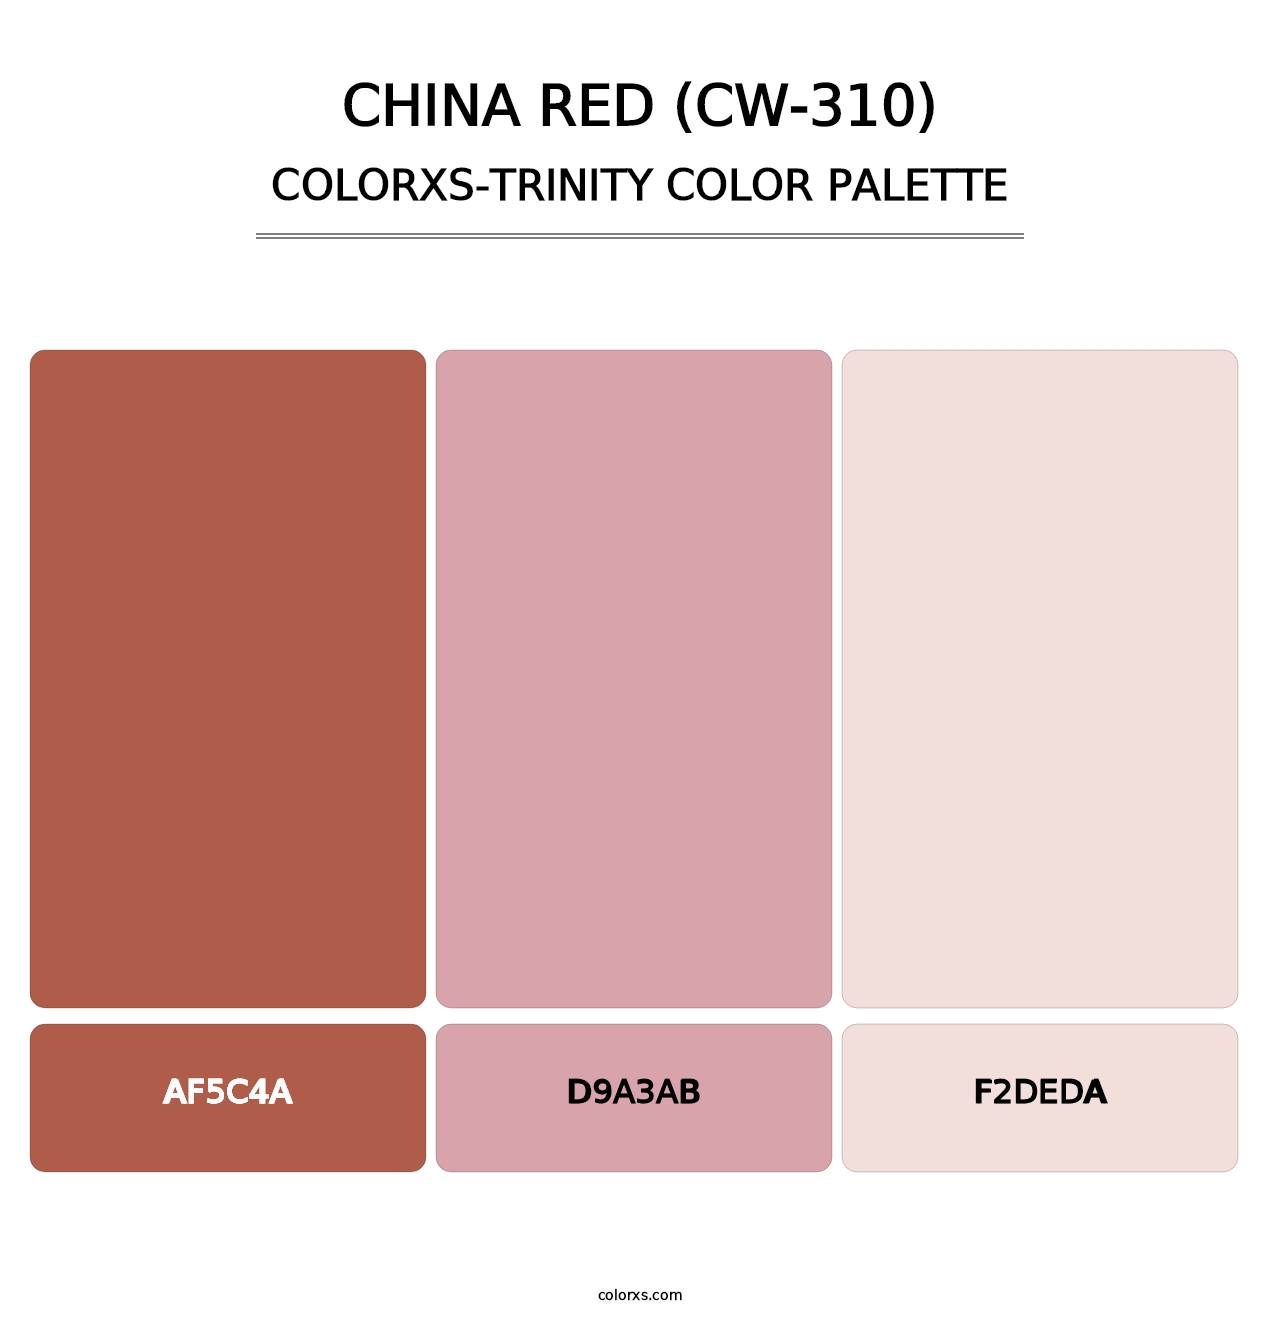 China Red (CW-310) - Colorxs Trinity Palette